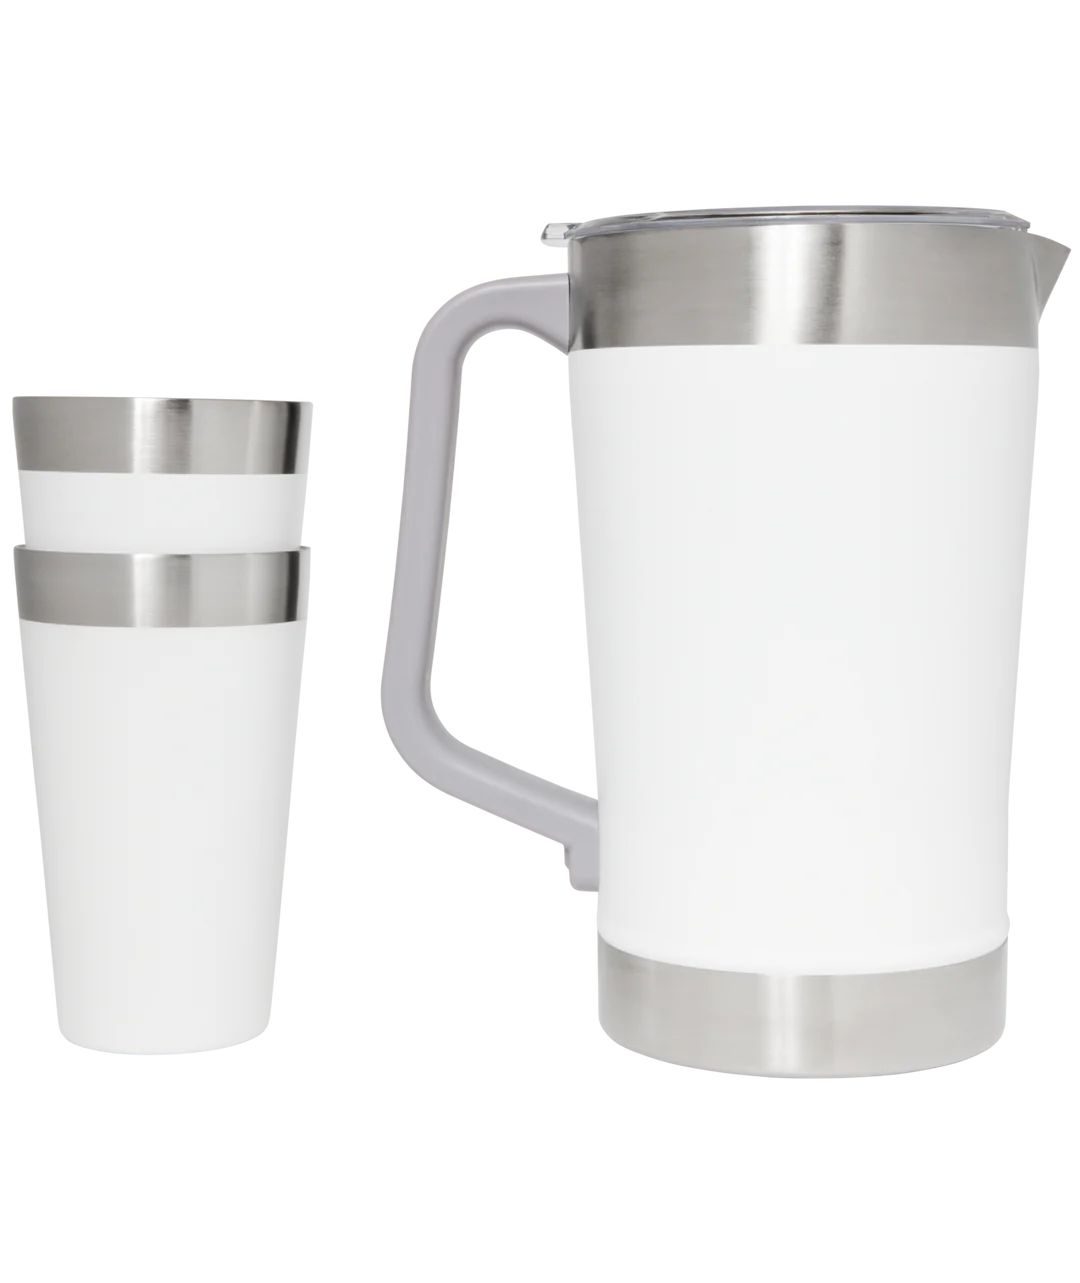 Classic Stay Chill Beer Pitcher Set | Stanley PMI US